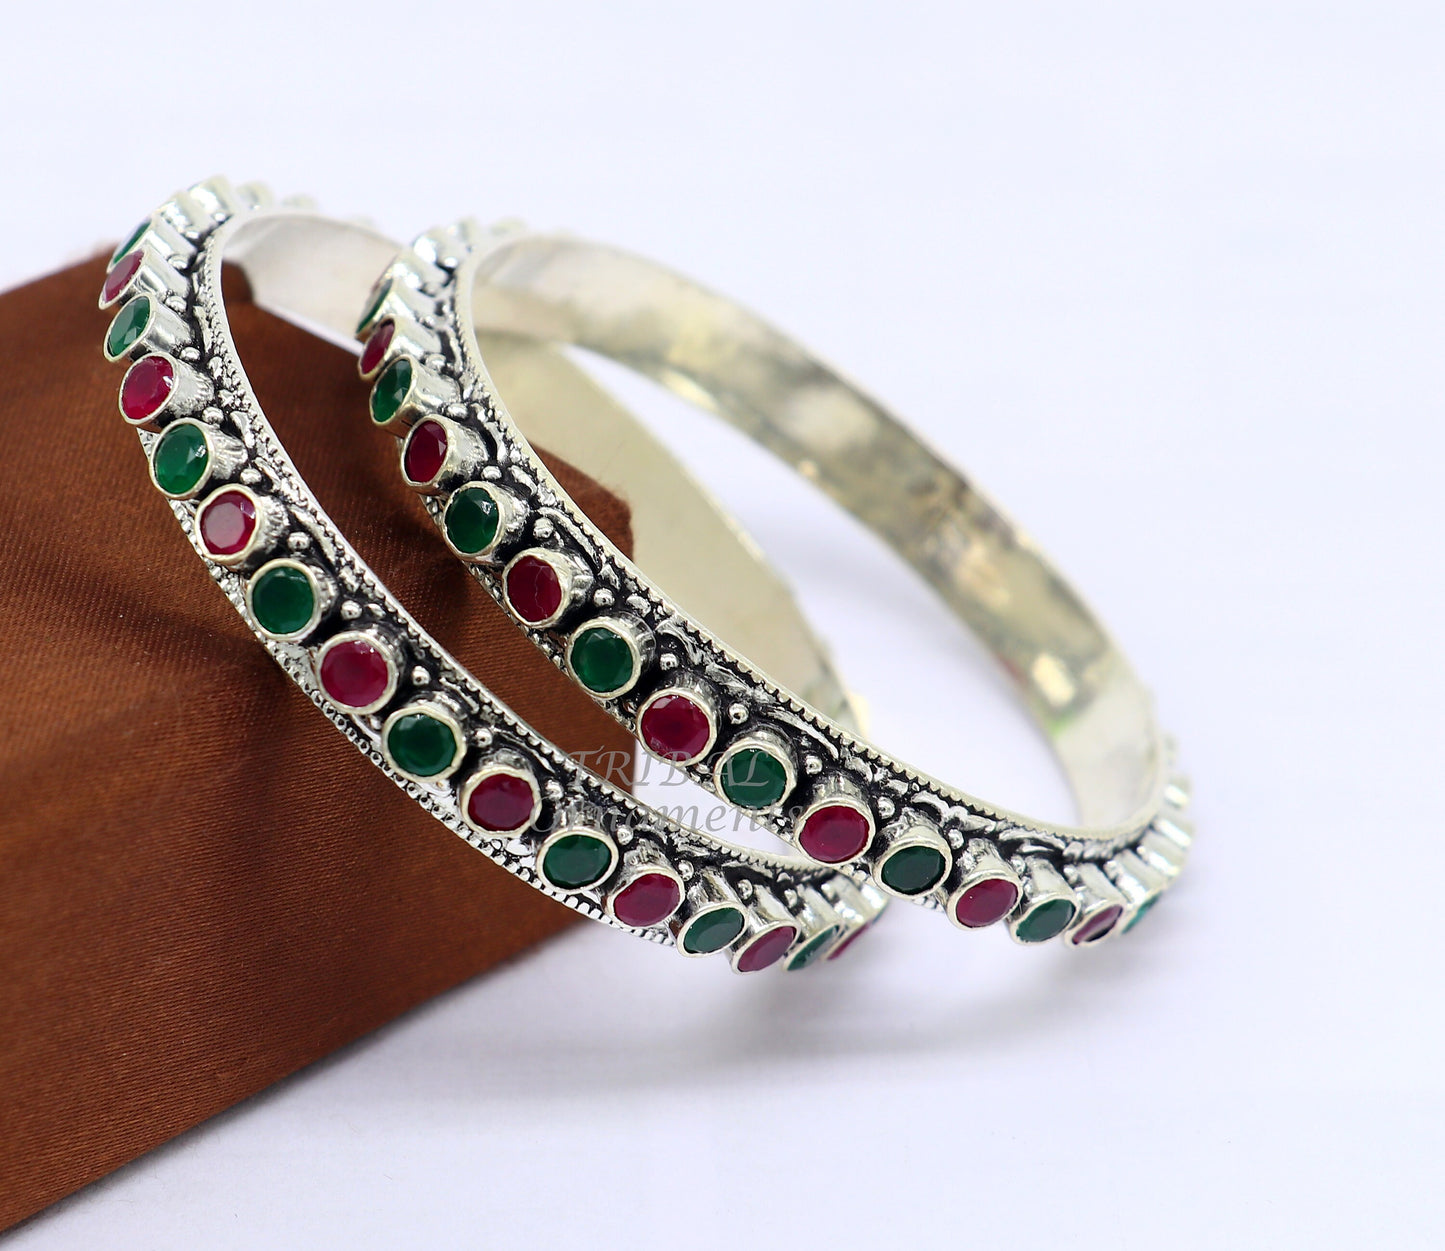 925 sterling silver handmade fabulous cut stone bangle bracelet gorgeous green and red color stone elegant girl's women's jewelry ba175 - TRIBAL ORNAMENTS